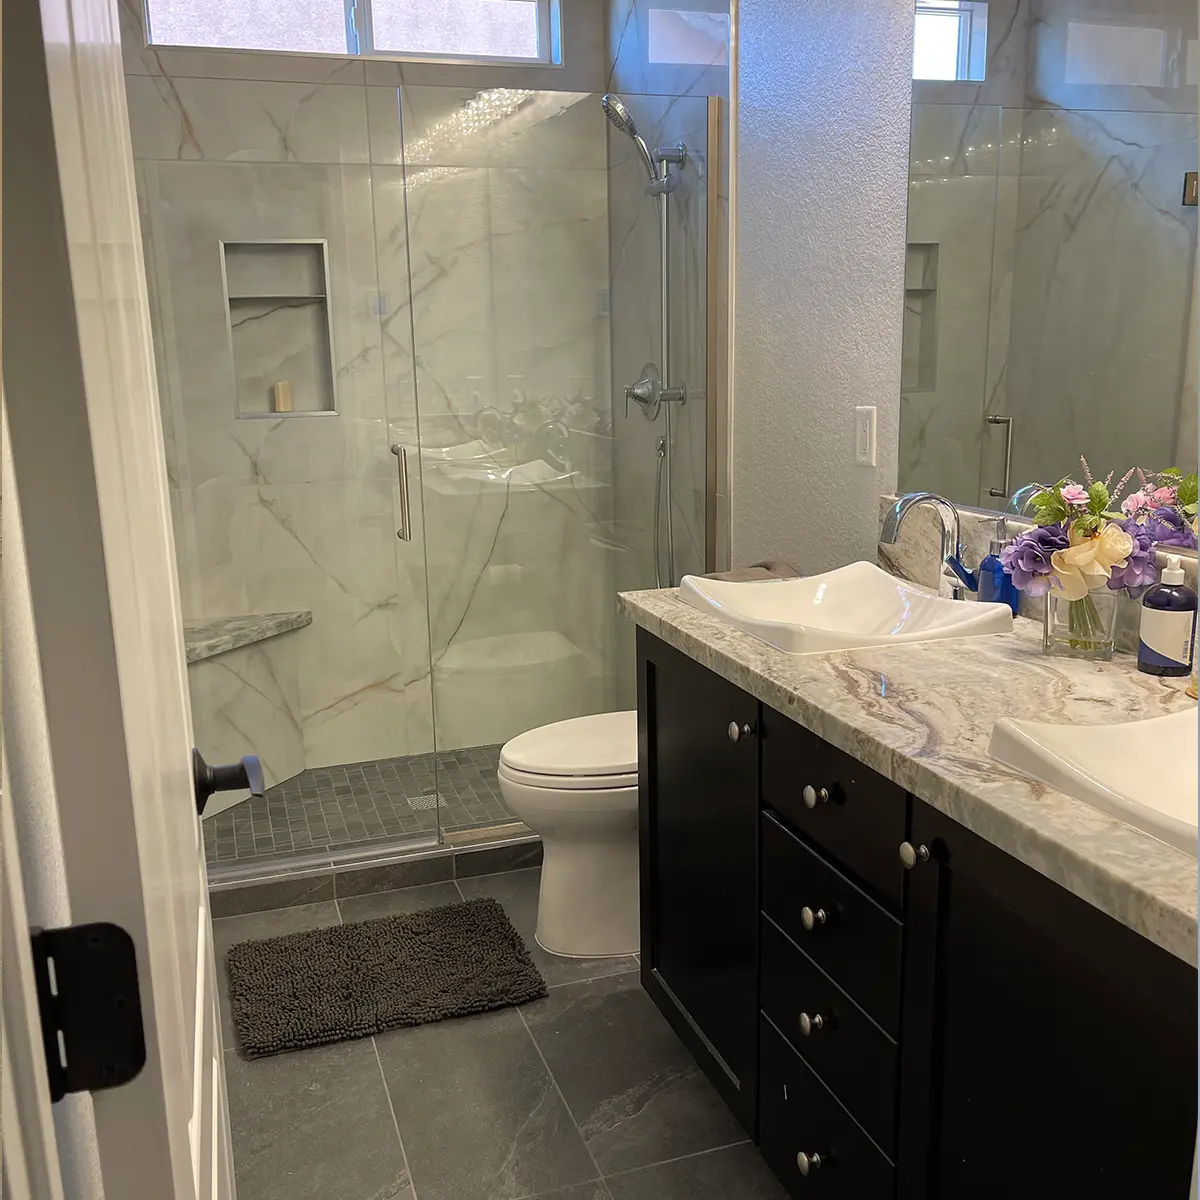 A small bathroom with tile flooring, quartz countertop, a walk-in shower, and two beautiful sinks